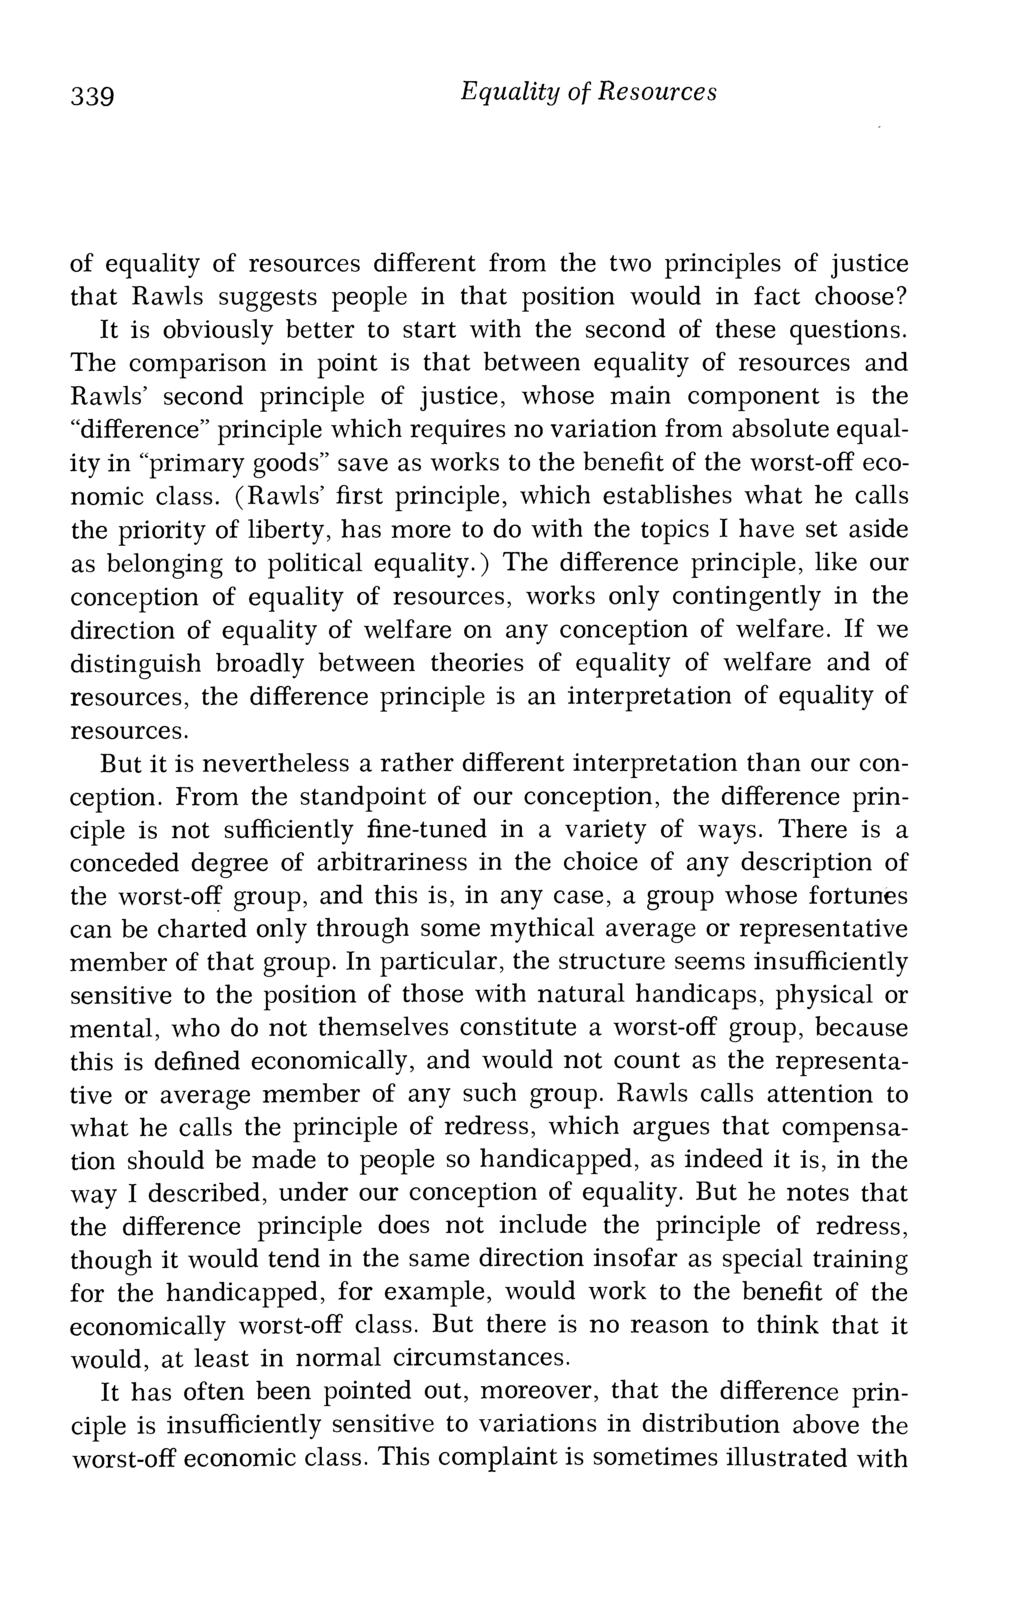 Equality of Resources of equality of resources different from the two principles of justice that Rawls suggests people in that position would in fact choose?